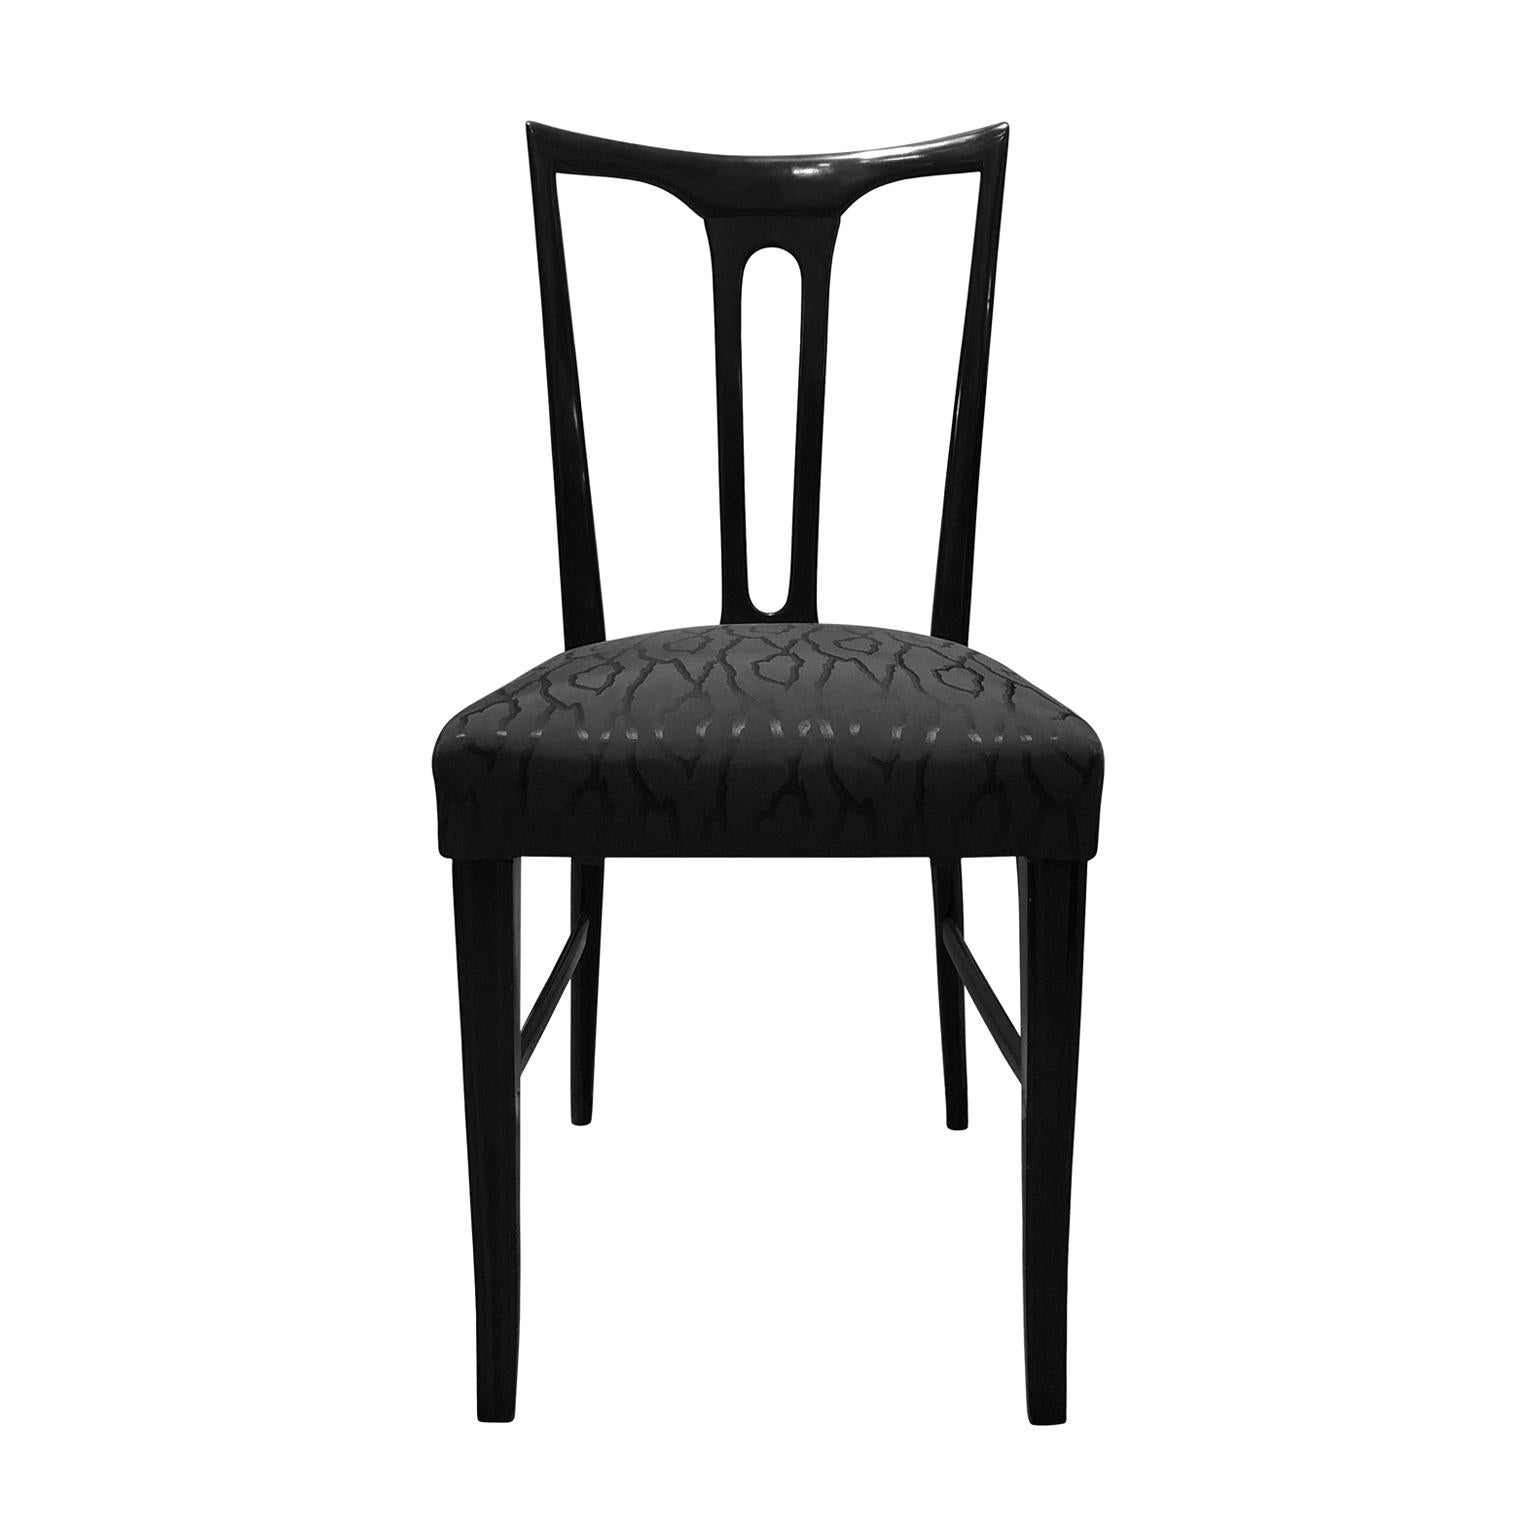 Mid-20th Century Midcentury Italian Ebonized Occasional Chair in Black Patterned Satin For Sale